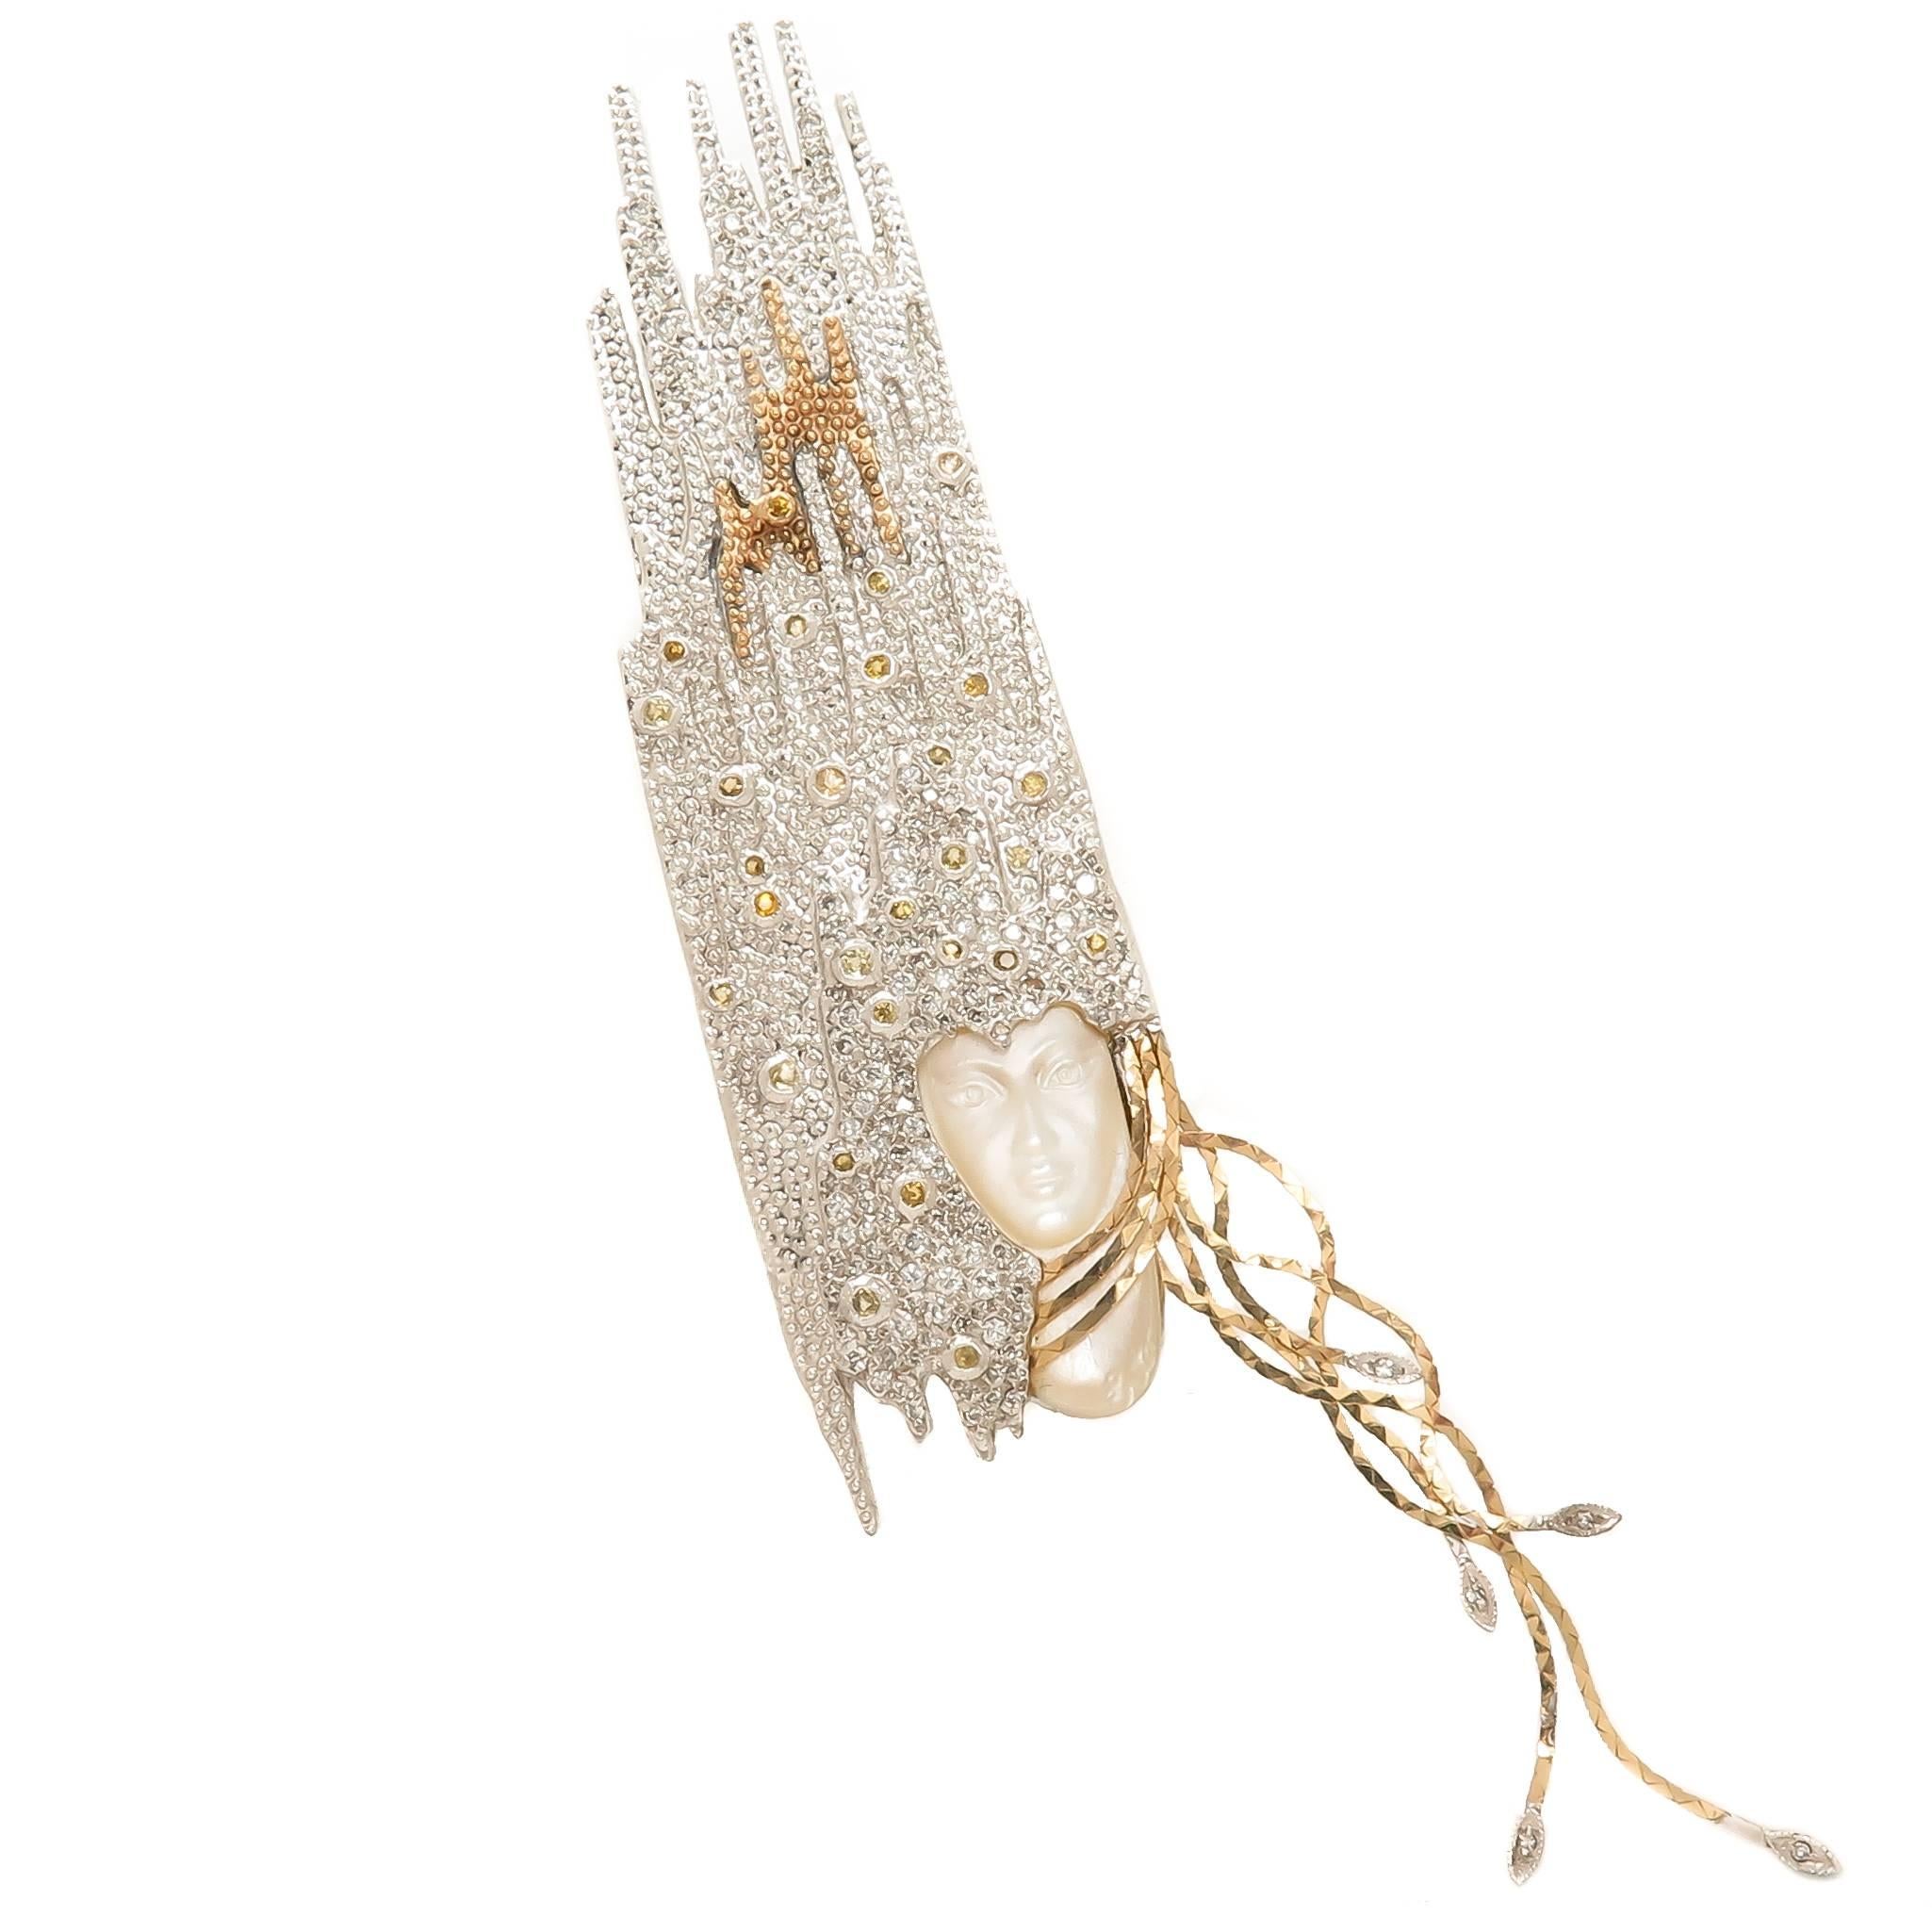 circa 1984 Sophistication Necklace by Erte, 14K Yellow Gold and Sterling Silver, Finely textured and having Granulation work throughout, set with Numerous Diamonds and a Carved Face of Mother Of Pearl. This Piece converts into a large Brooch and a